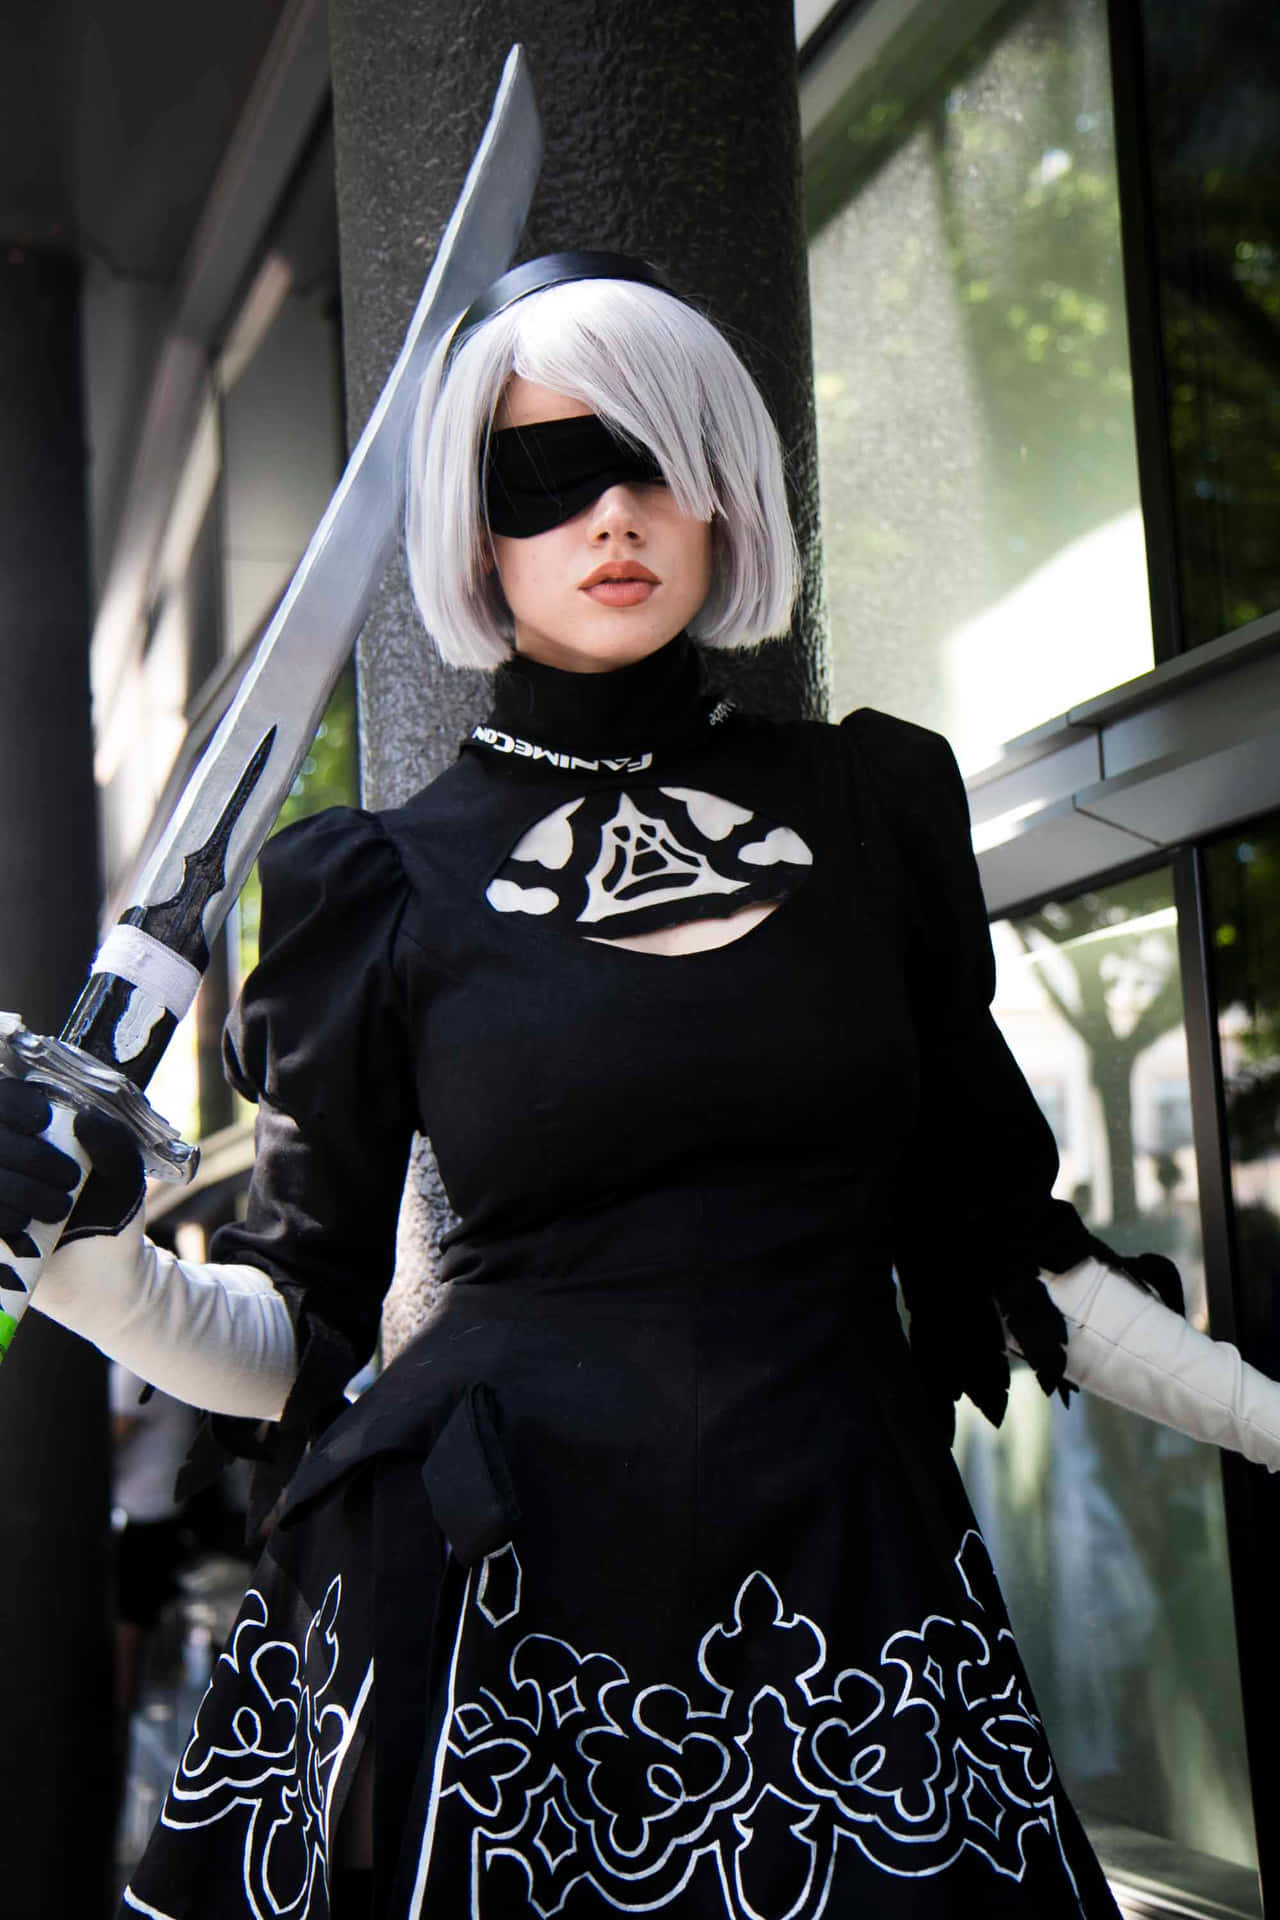 "2B – the ultimate android warrior"